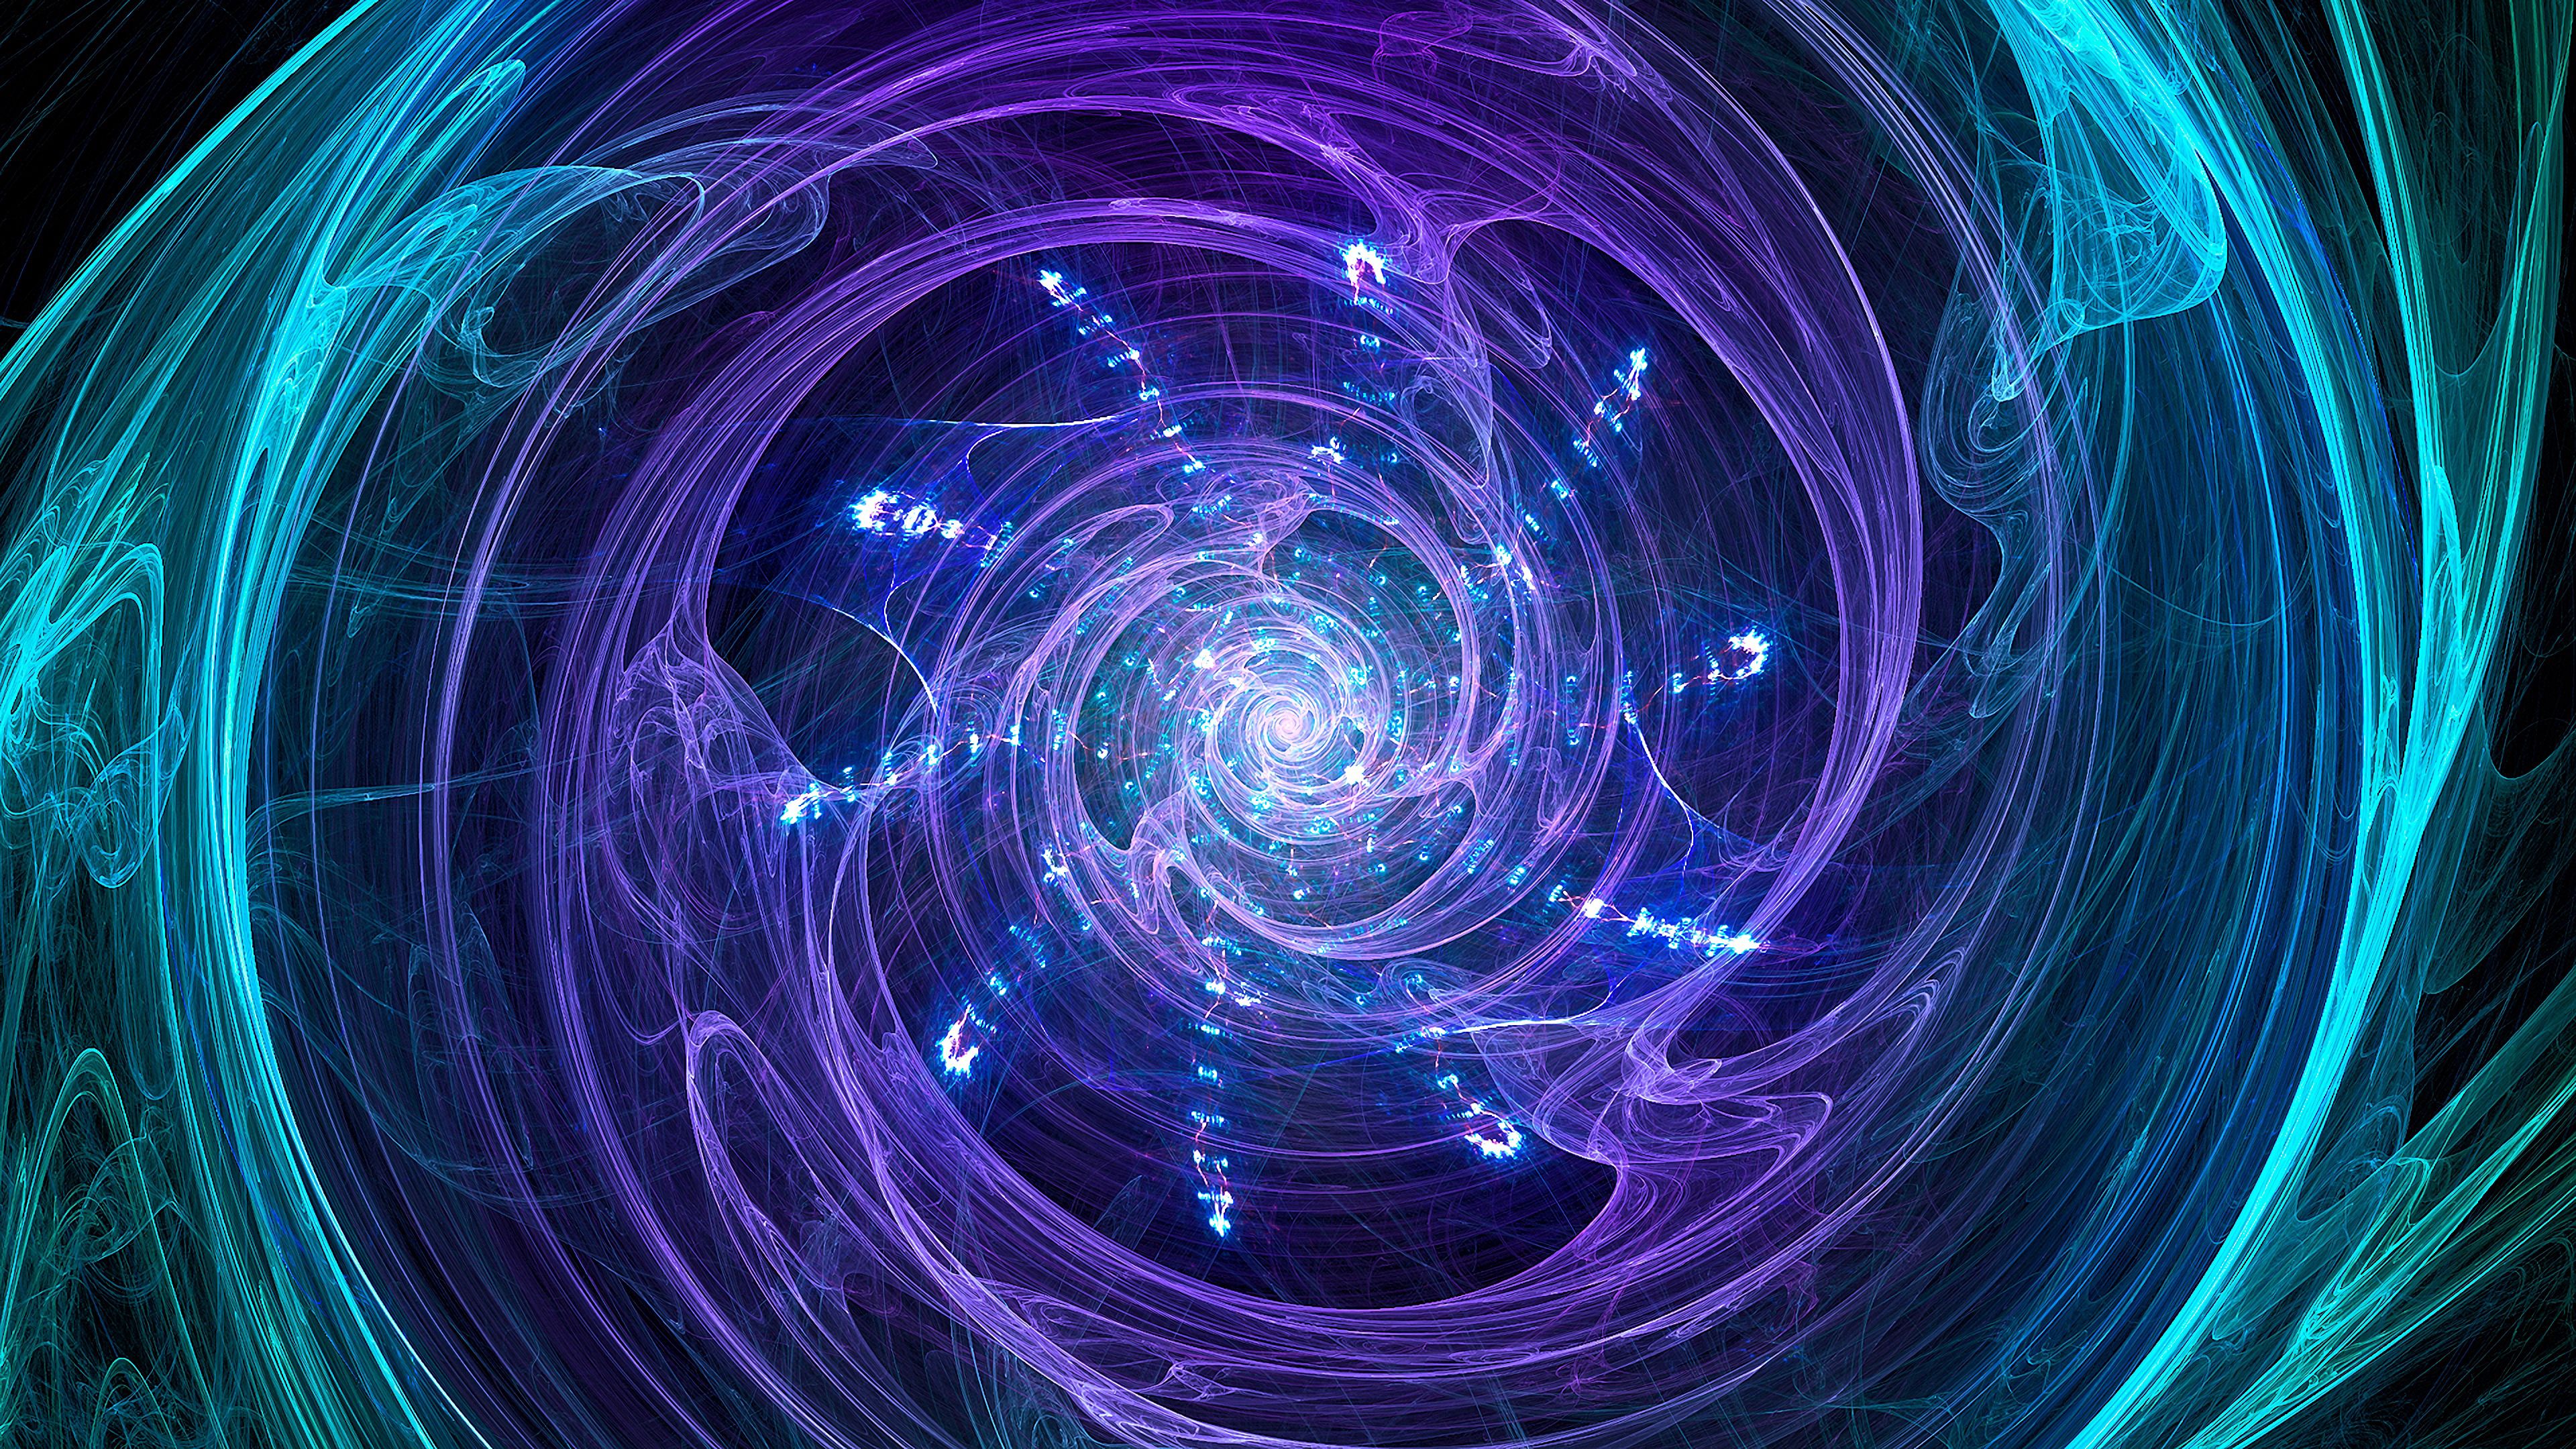 abstract, fractal, glow, bright, swirling, involute